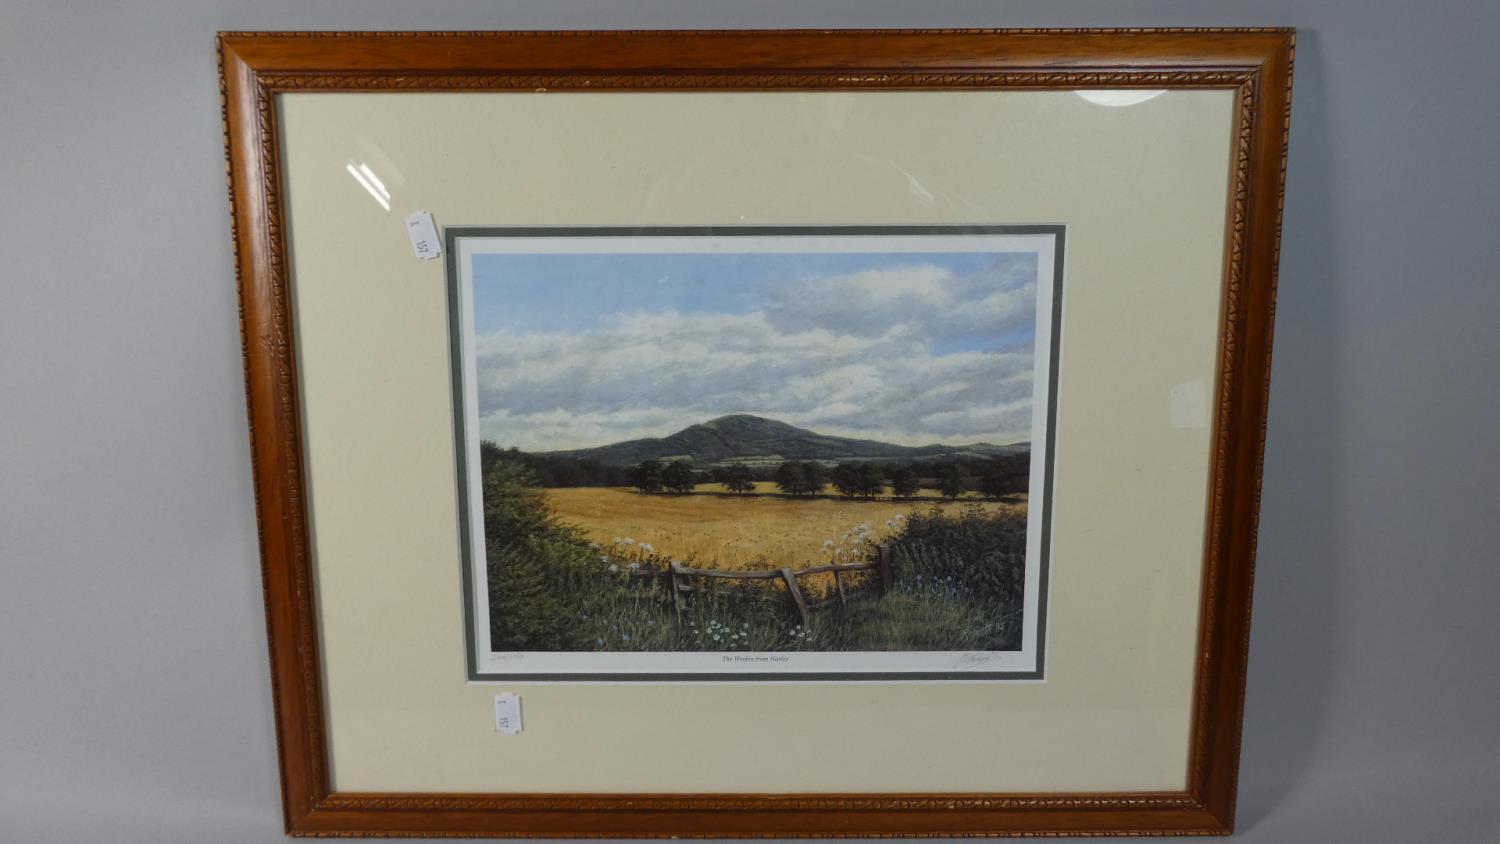 A Limited Edition Print of Shropshire, The View from Harley, Signed and Numbered by Roberts